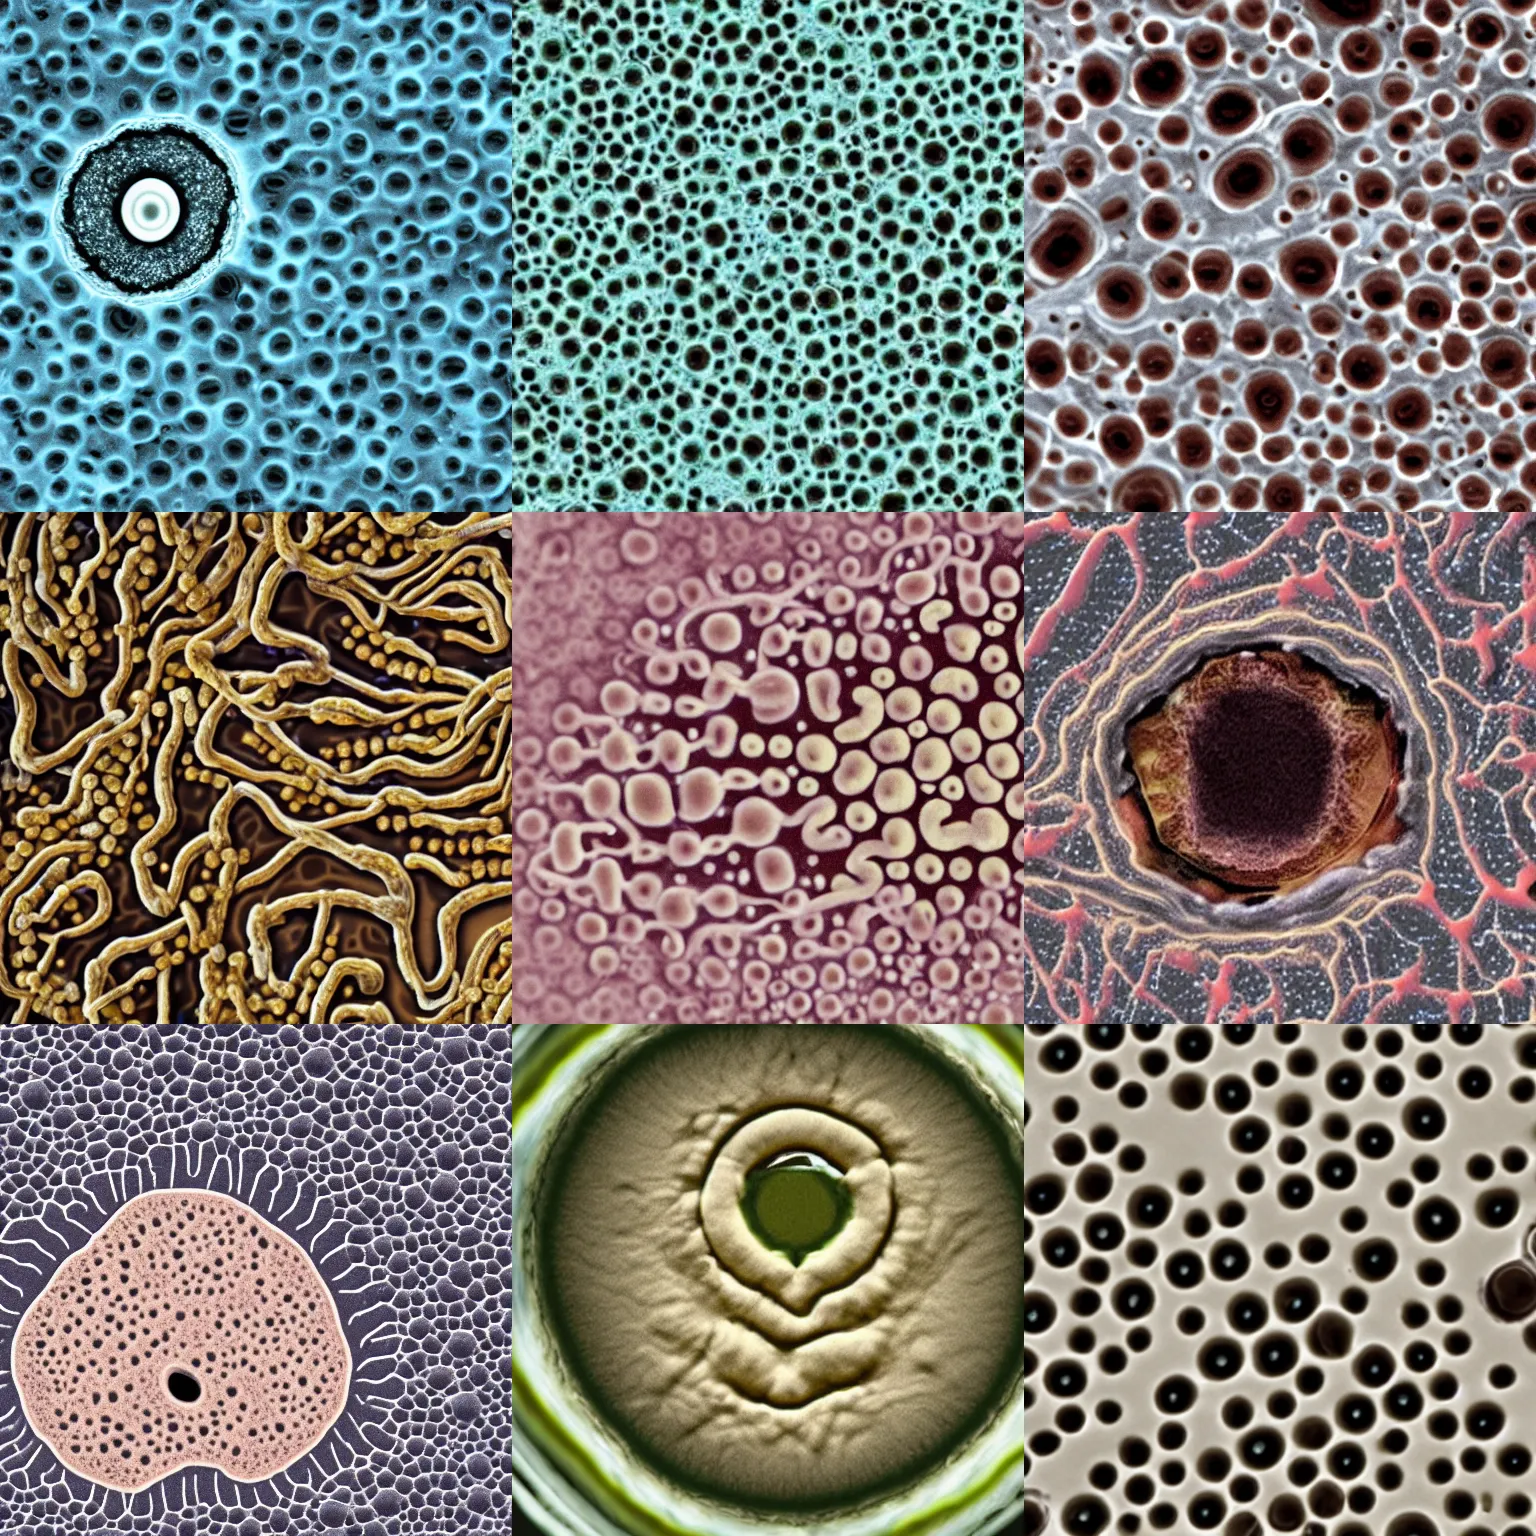 Prompt: Bacteria under the microscope with a human face